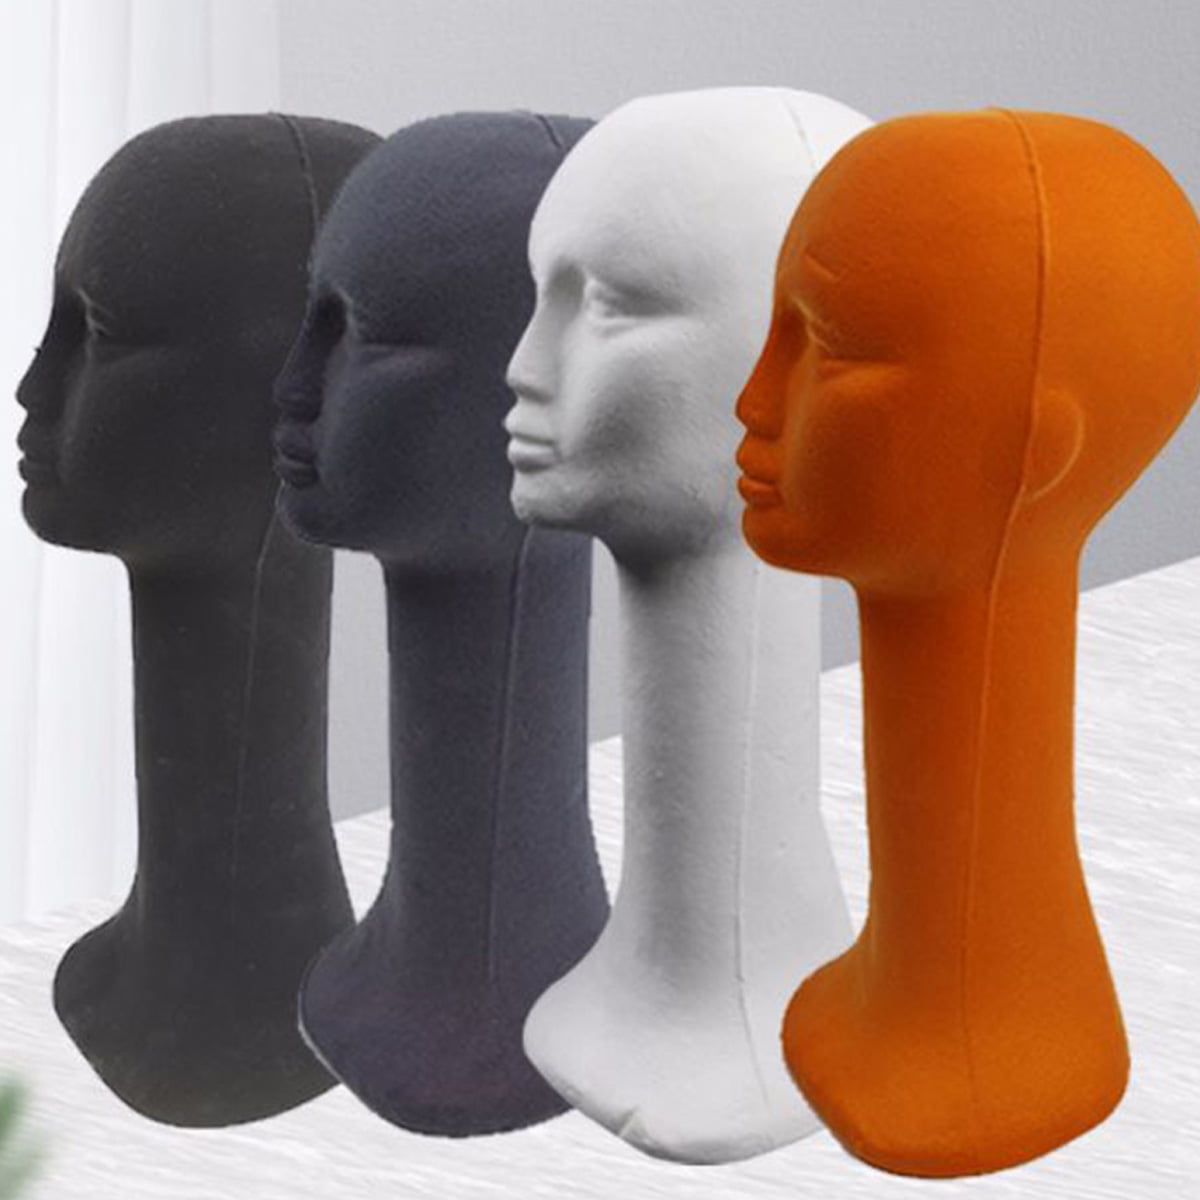 Travelwant 2Pcs/Set Styrofoam Wig Head - Tall Female Foam Mannequin Wig Stand and Holder for Style, Model and Display Hair, Hats and Hairpieces, Mask